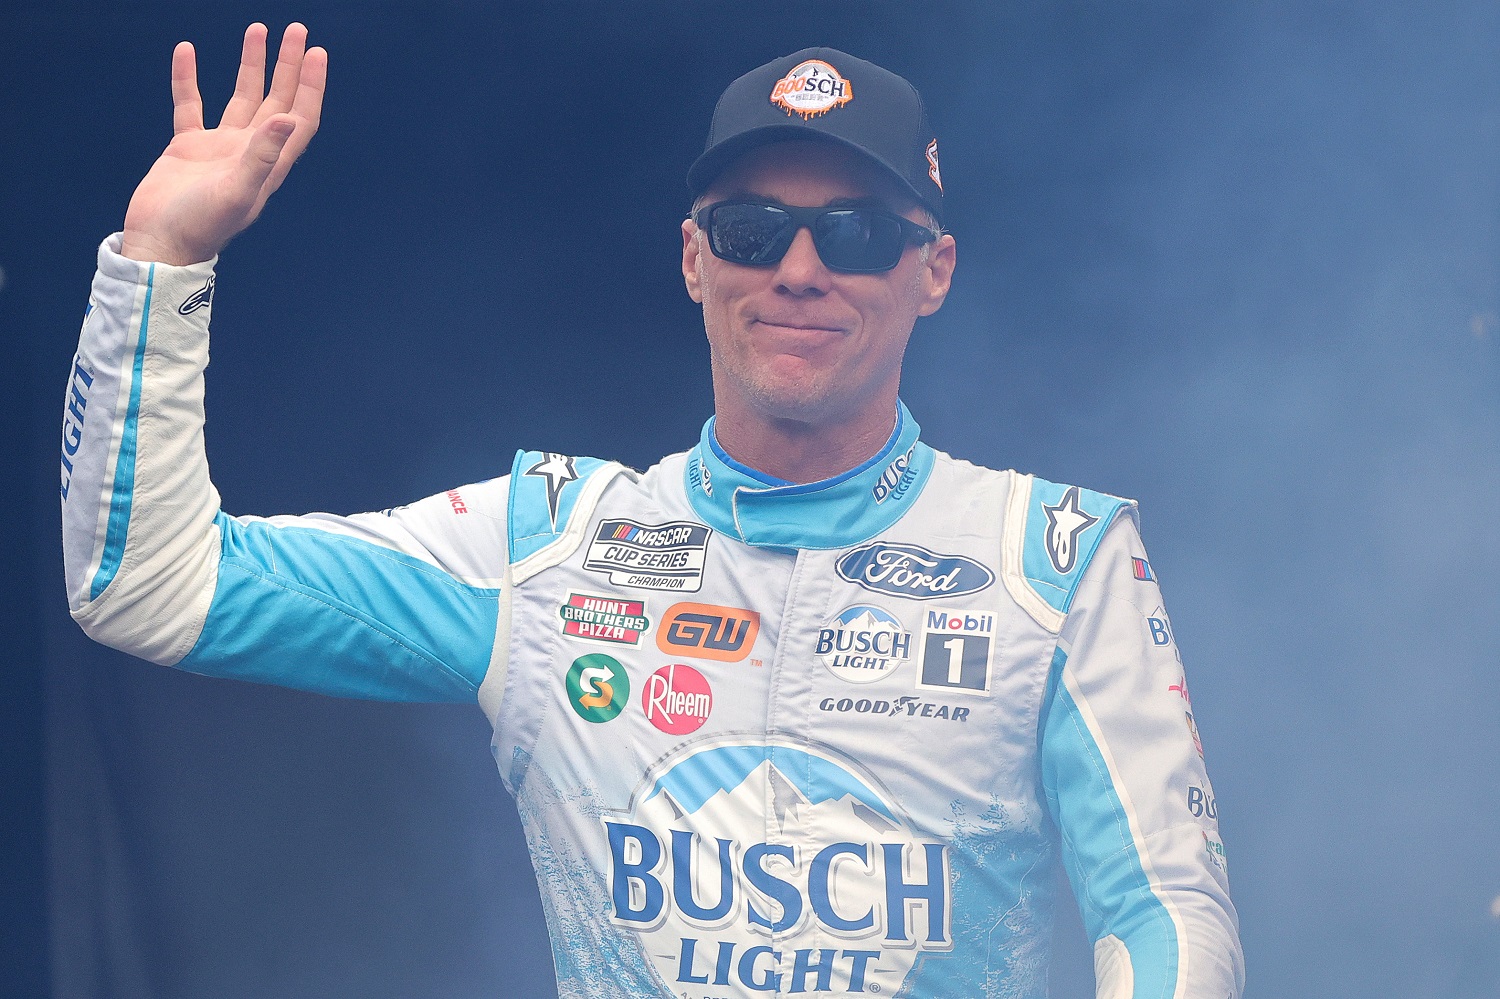 Kevin Harvick waves to fans during driver intros prior to the NASCAR Cup Series Xfinity 500 at Martinsville Speedway on Oct. 30, 2022.